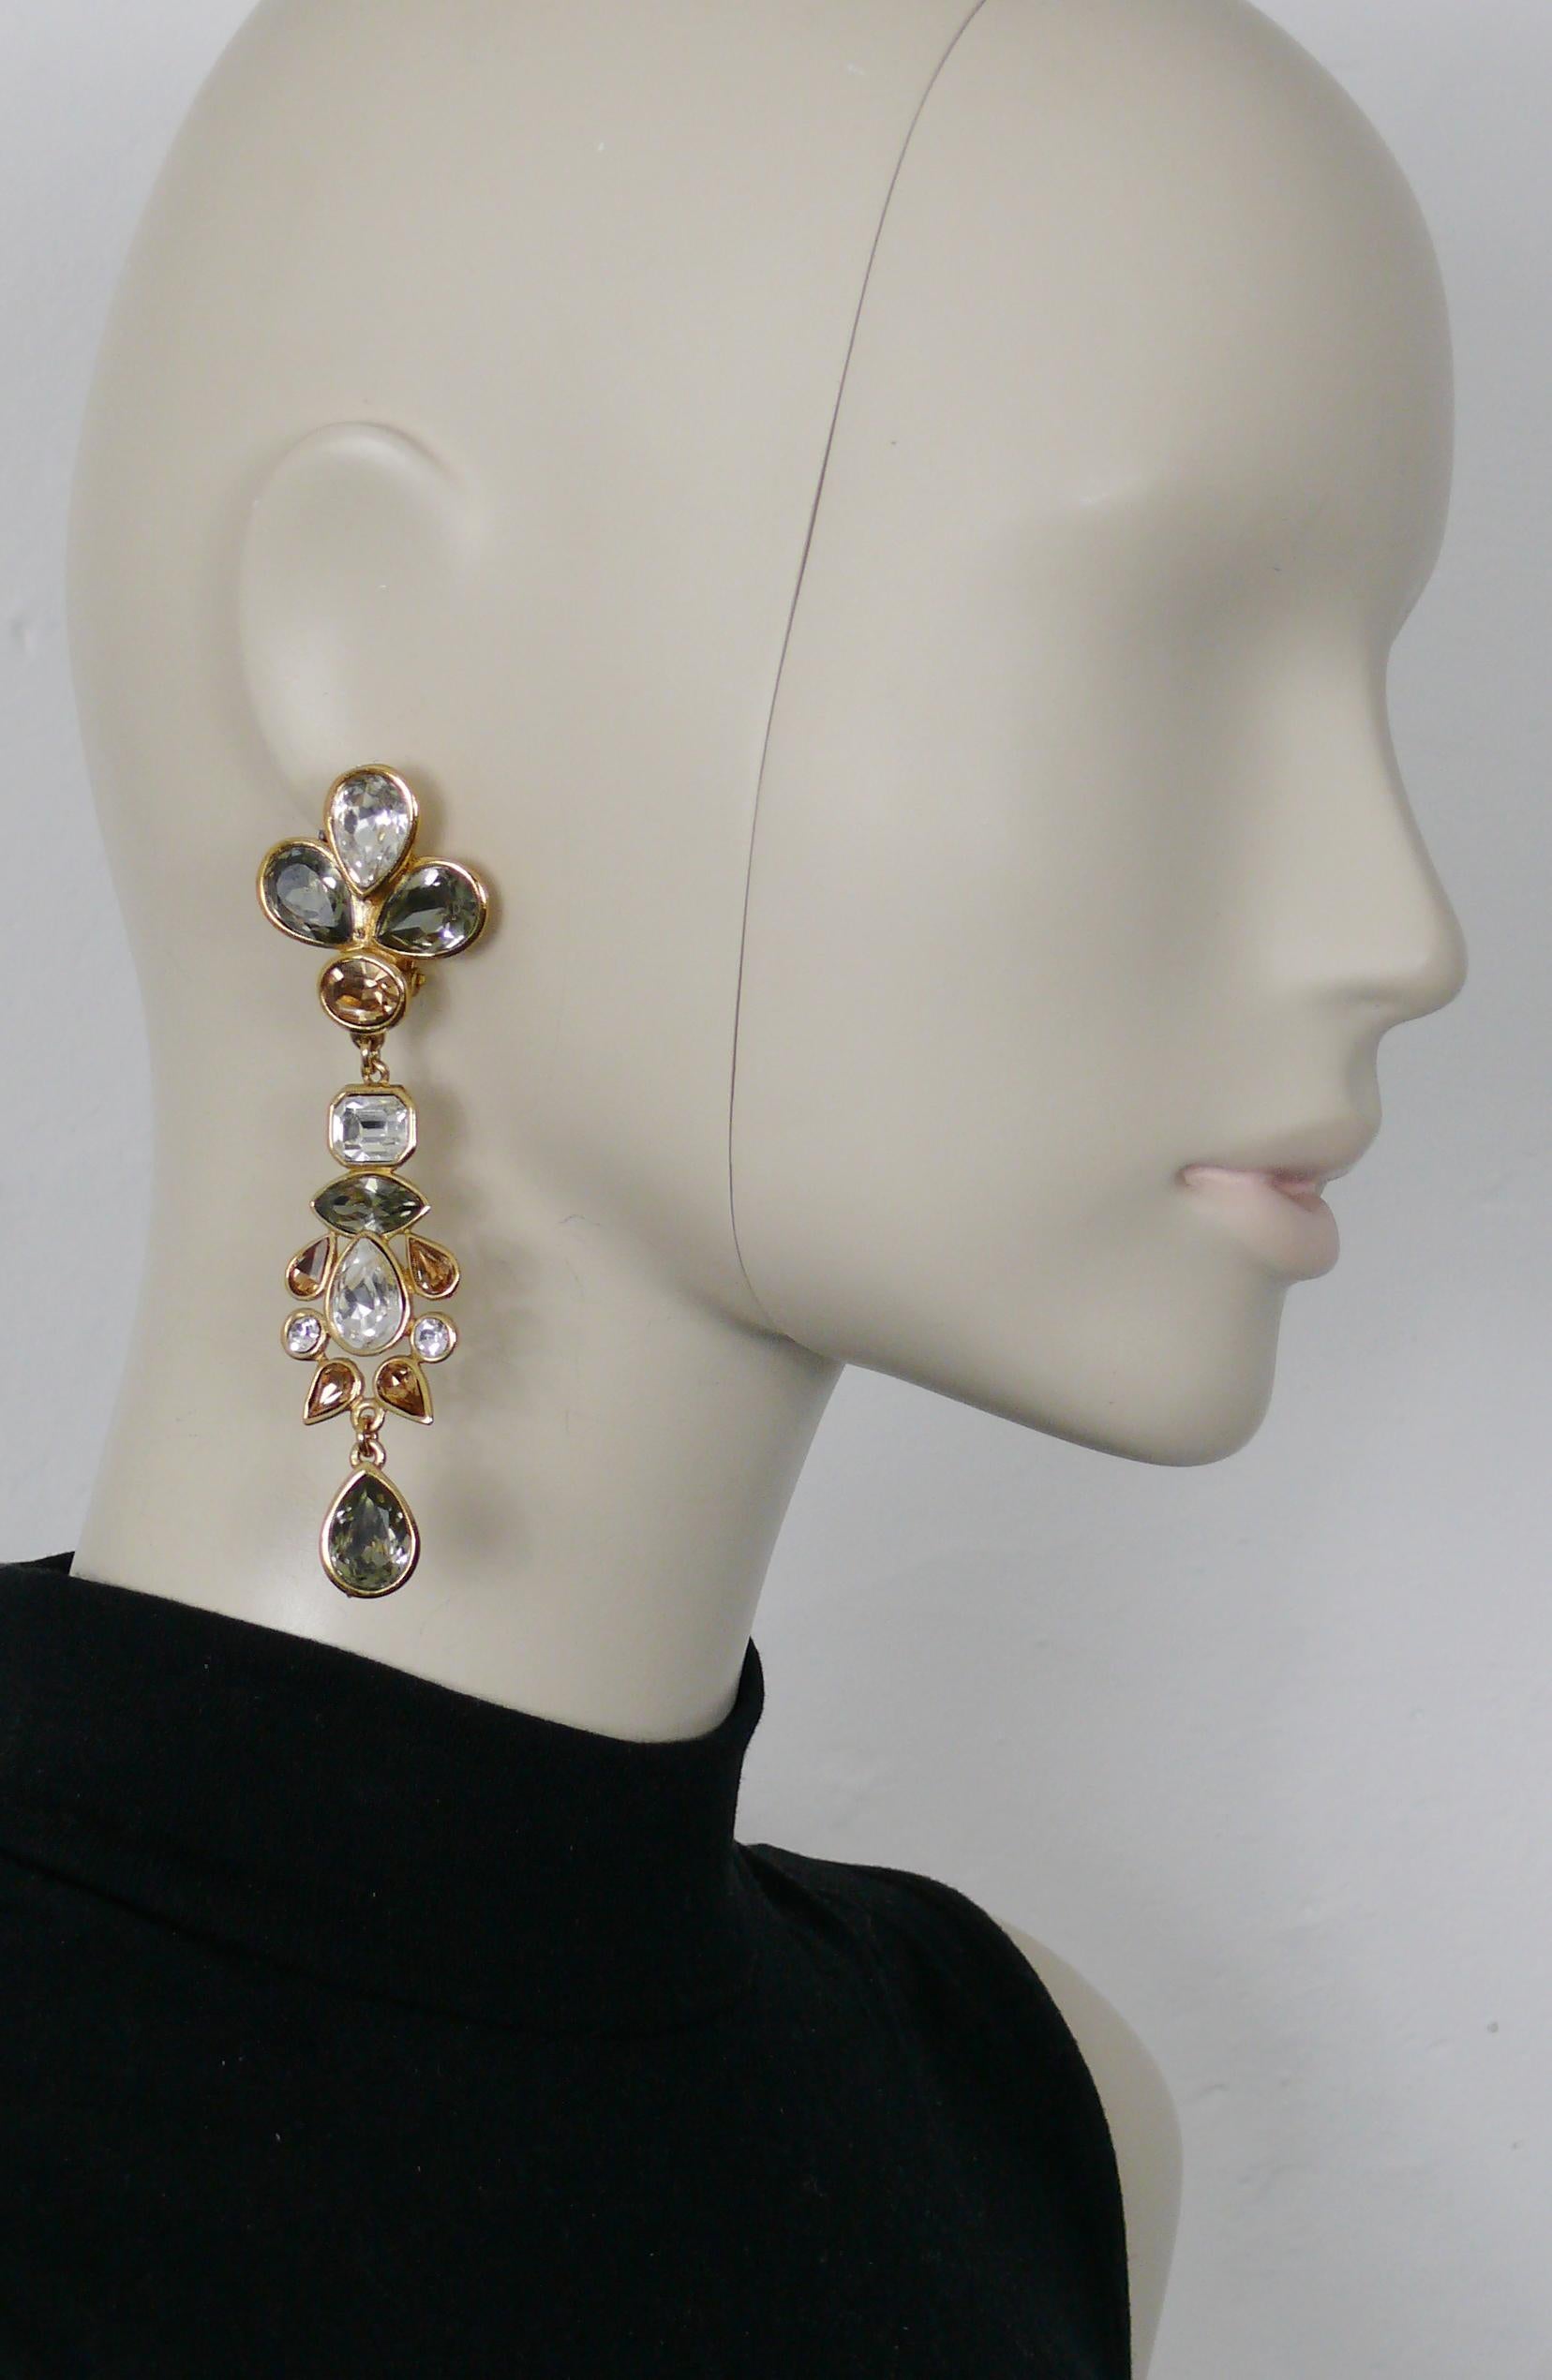 YVES SAINT LAURENT vintage gold toned dangling earrings (clip on) embellished with multicolor crystals.

Embossed YSL Made in France.

Indicative measurements : height approx. 10 cm (3.94 inches) / max. width approx. 3 cm (1.18 inches).

Weight per